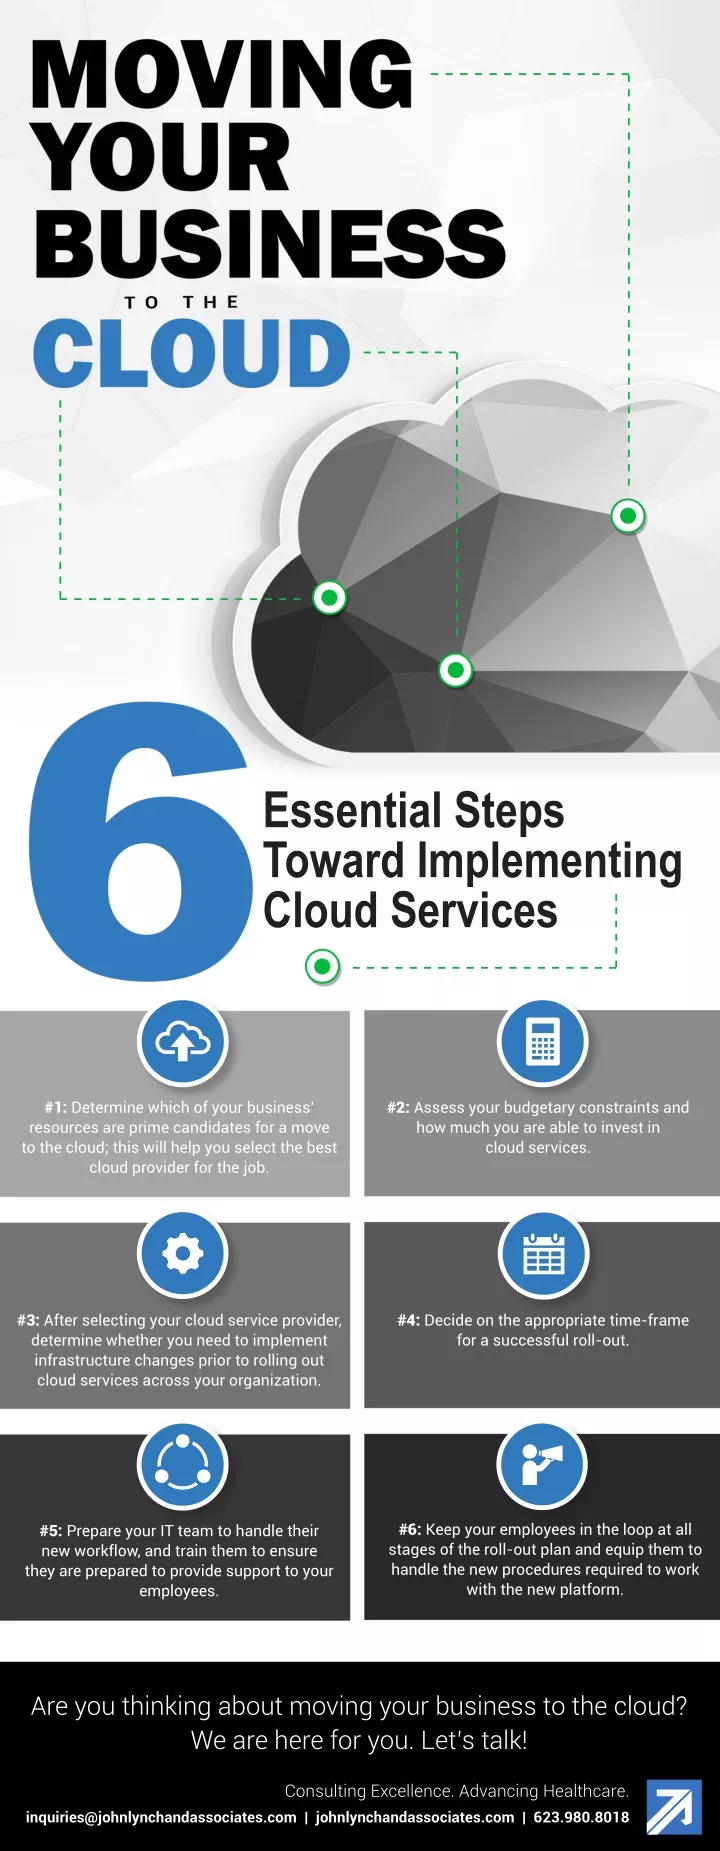 essential steps toward implementing cloud services